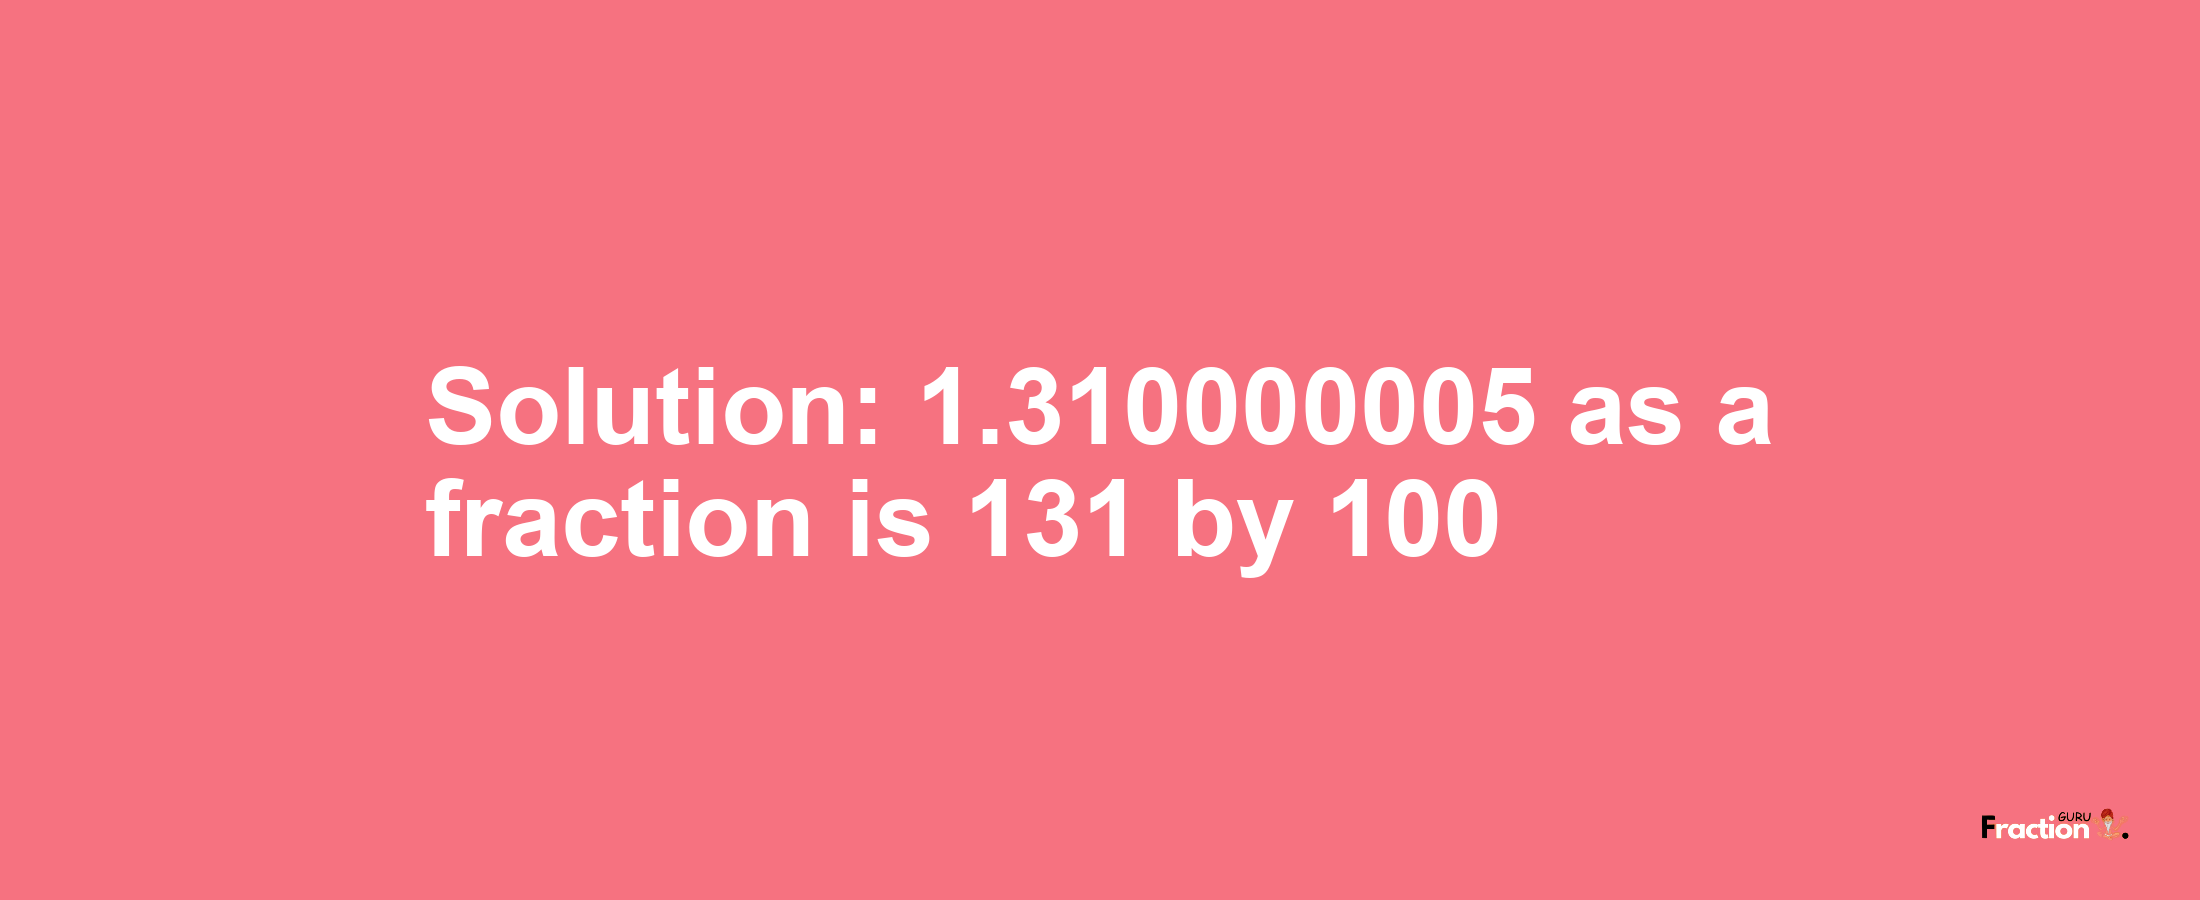 Solution:1.310000005 as a fraction is 131/100